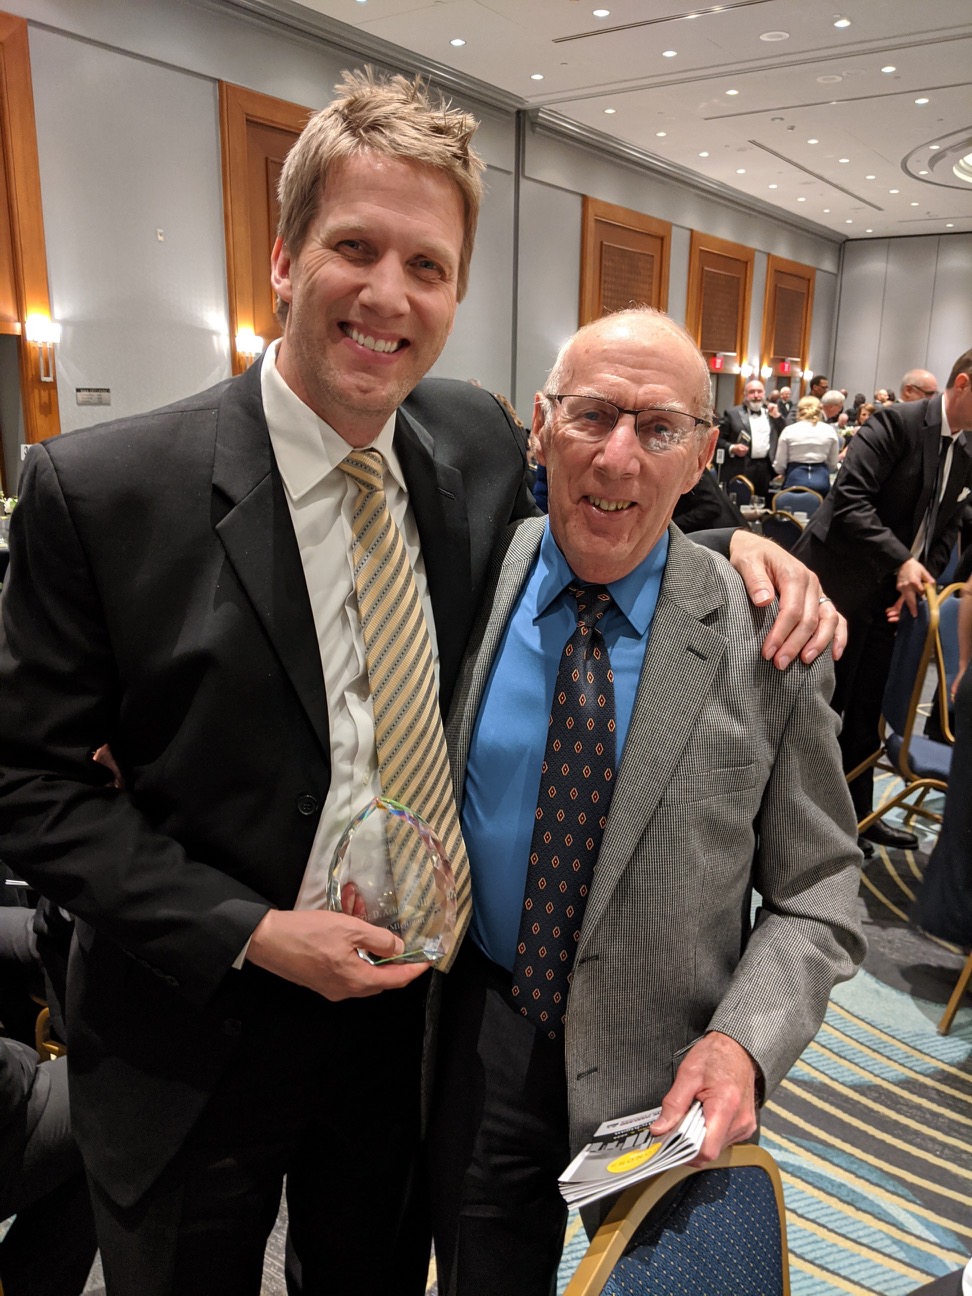 Dr. Eric Achtyes and his father at an award banquet